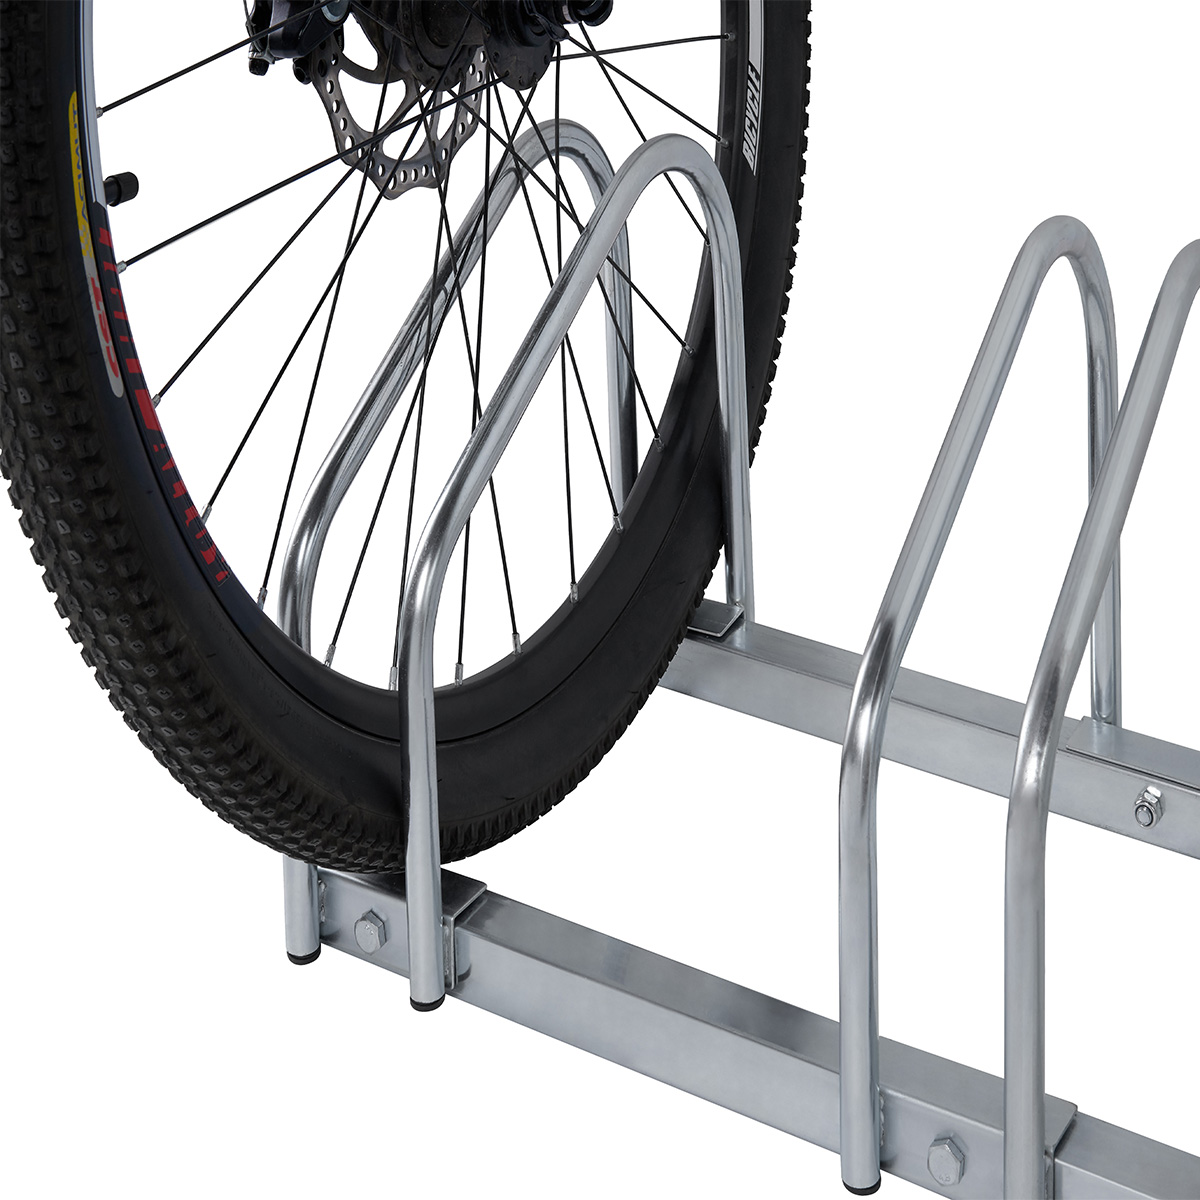 Garden Or Shed And For Security 5 Bike Floor Or Wall Mount Bicycle//Galvanised Cycle Rack Storage Locking Stand Great For Garage 3 Hillington 2 4